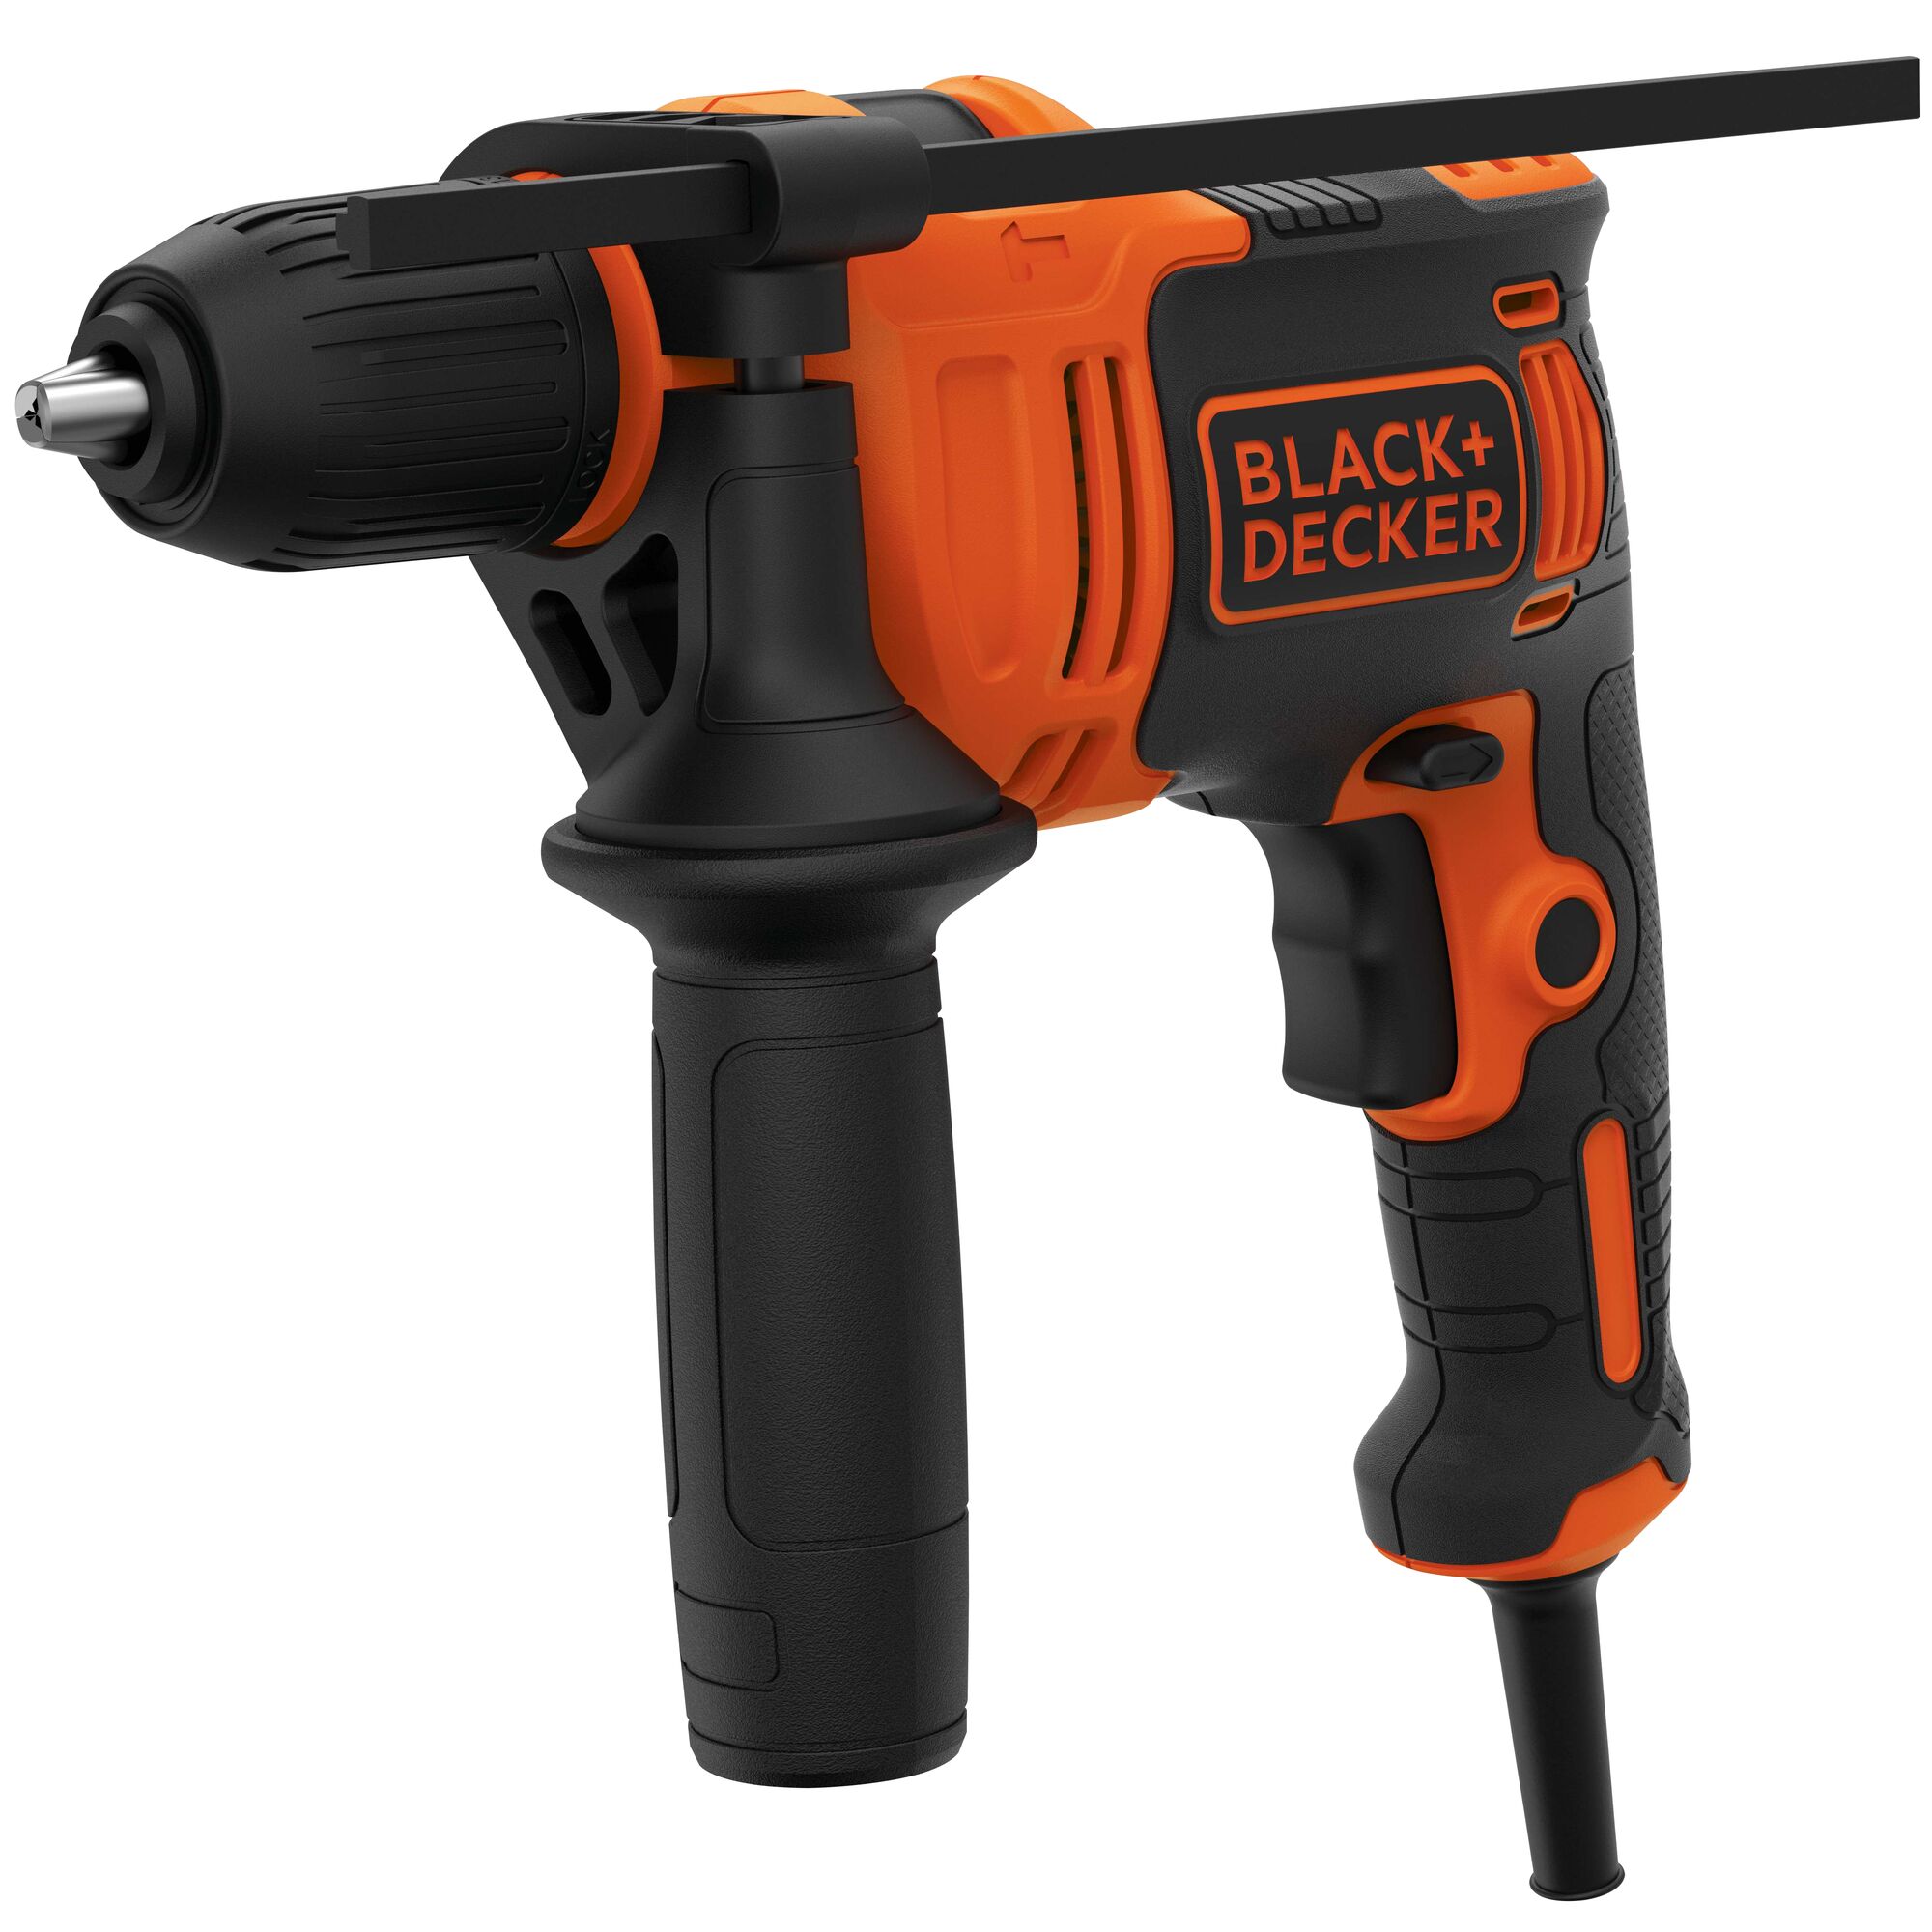 Profile of 6.5 ampere 1.5 inch hammer drill.